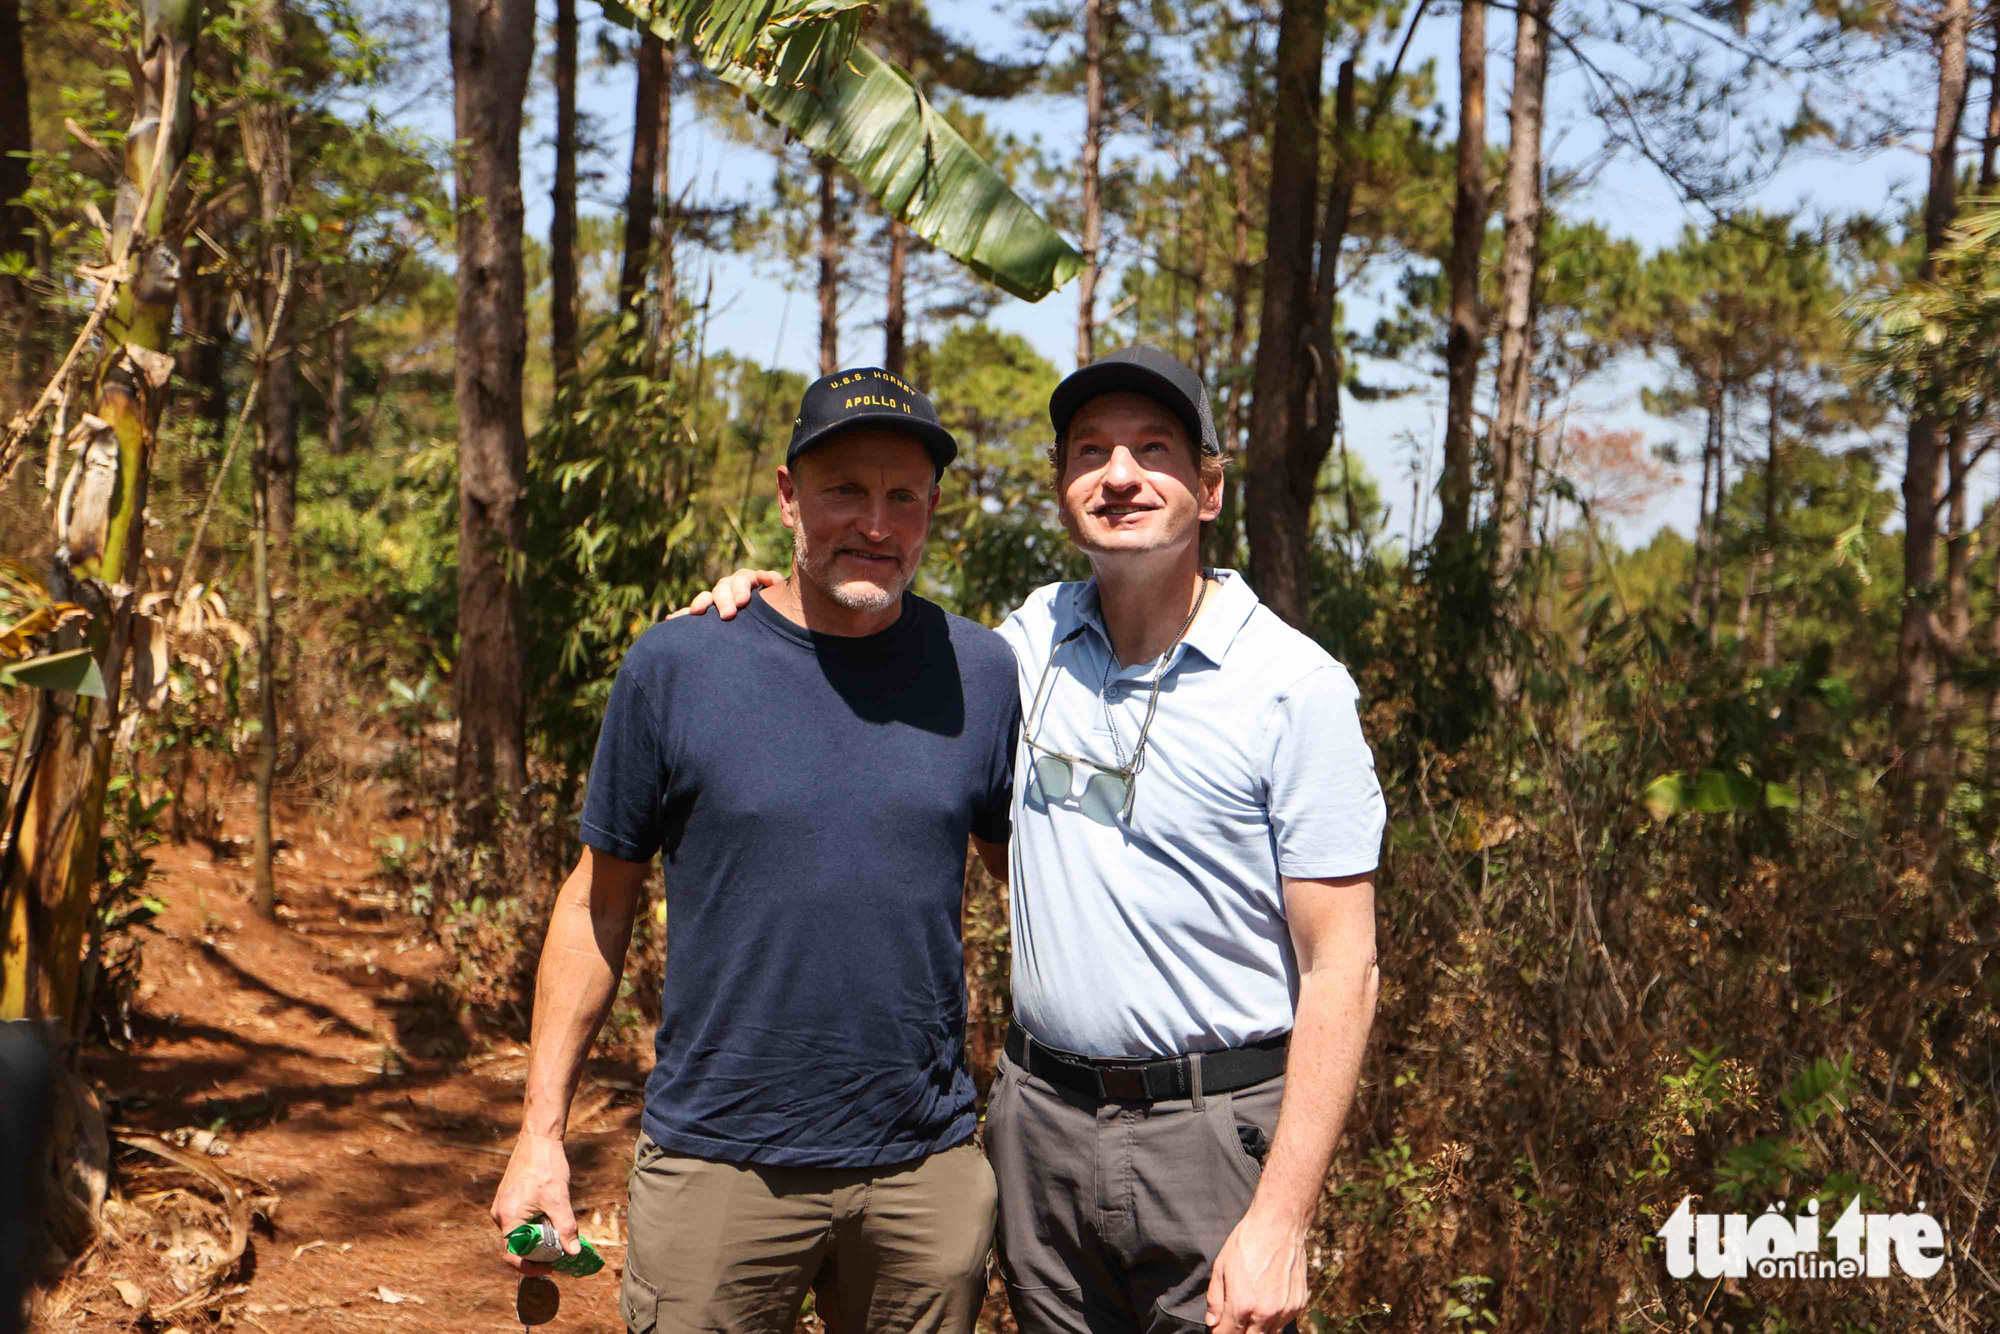 Dean Phillips (R) and actor Woody Harrelson pose for a photo at the site where the former’s father died in 1969. Photo: Nguyen Khanh / Tuoi Tre